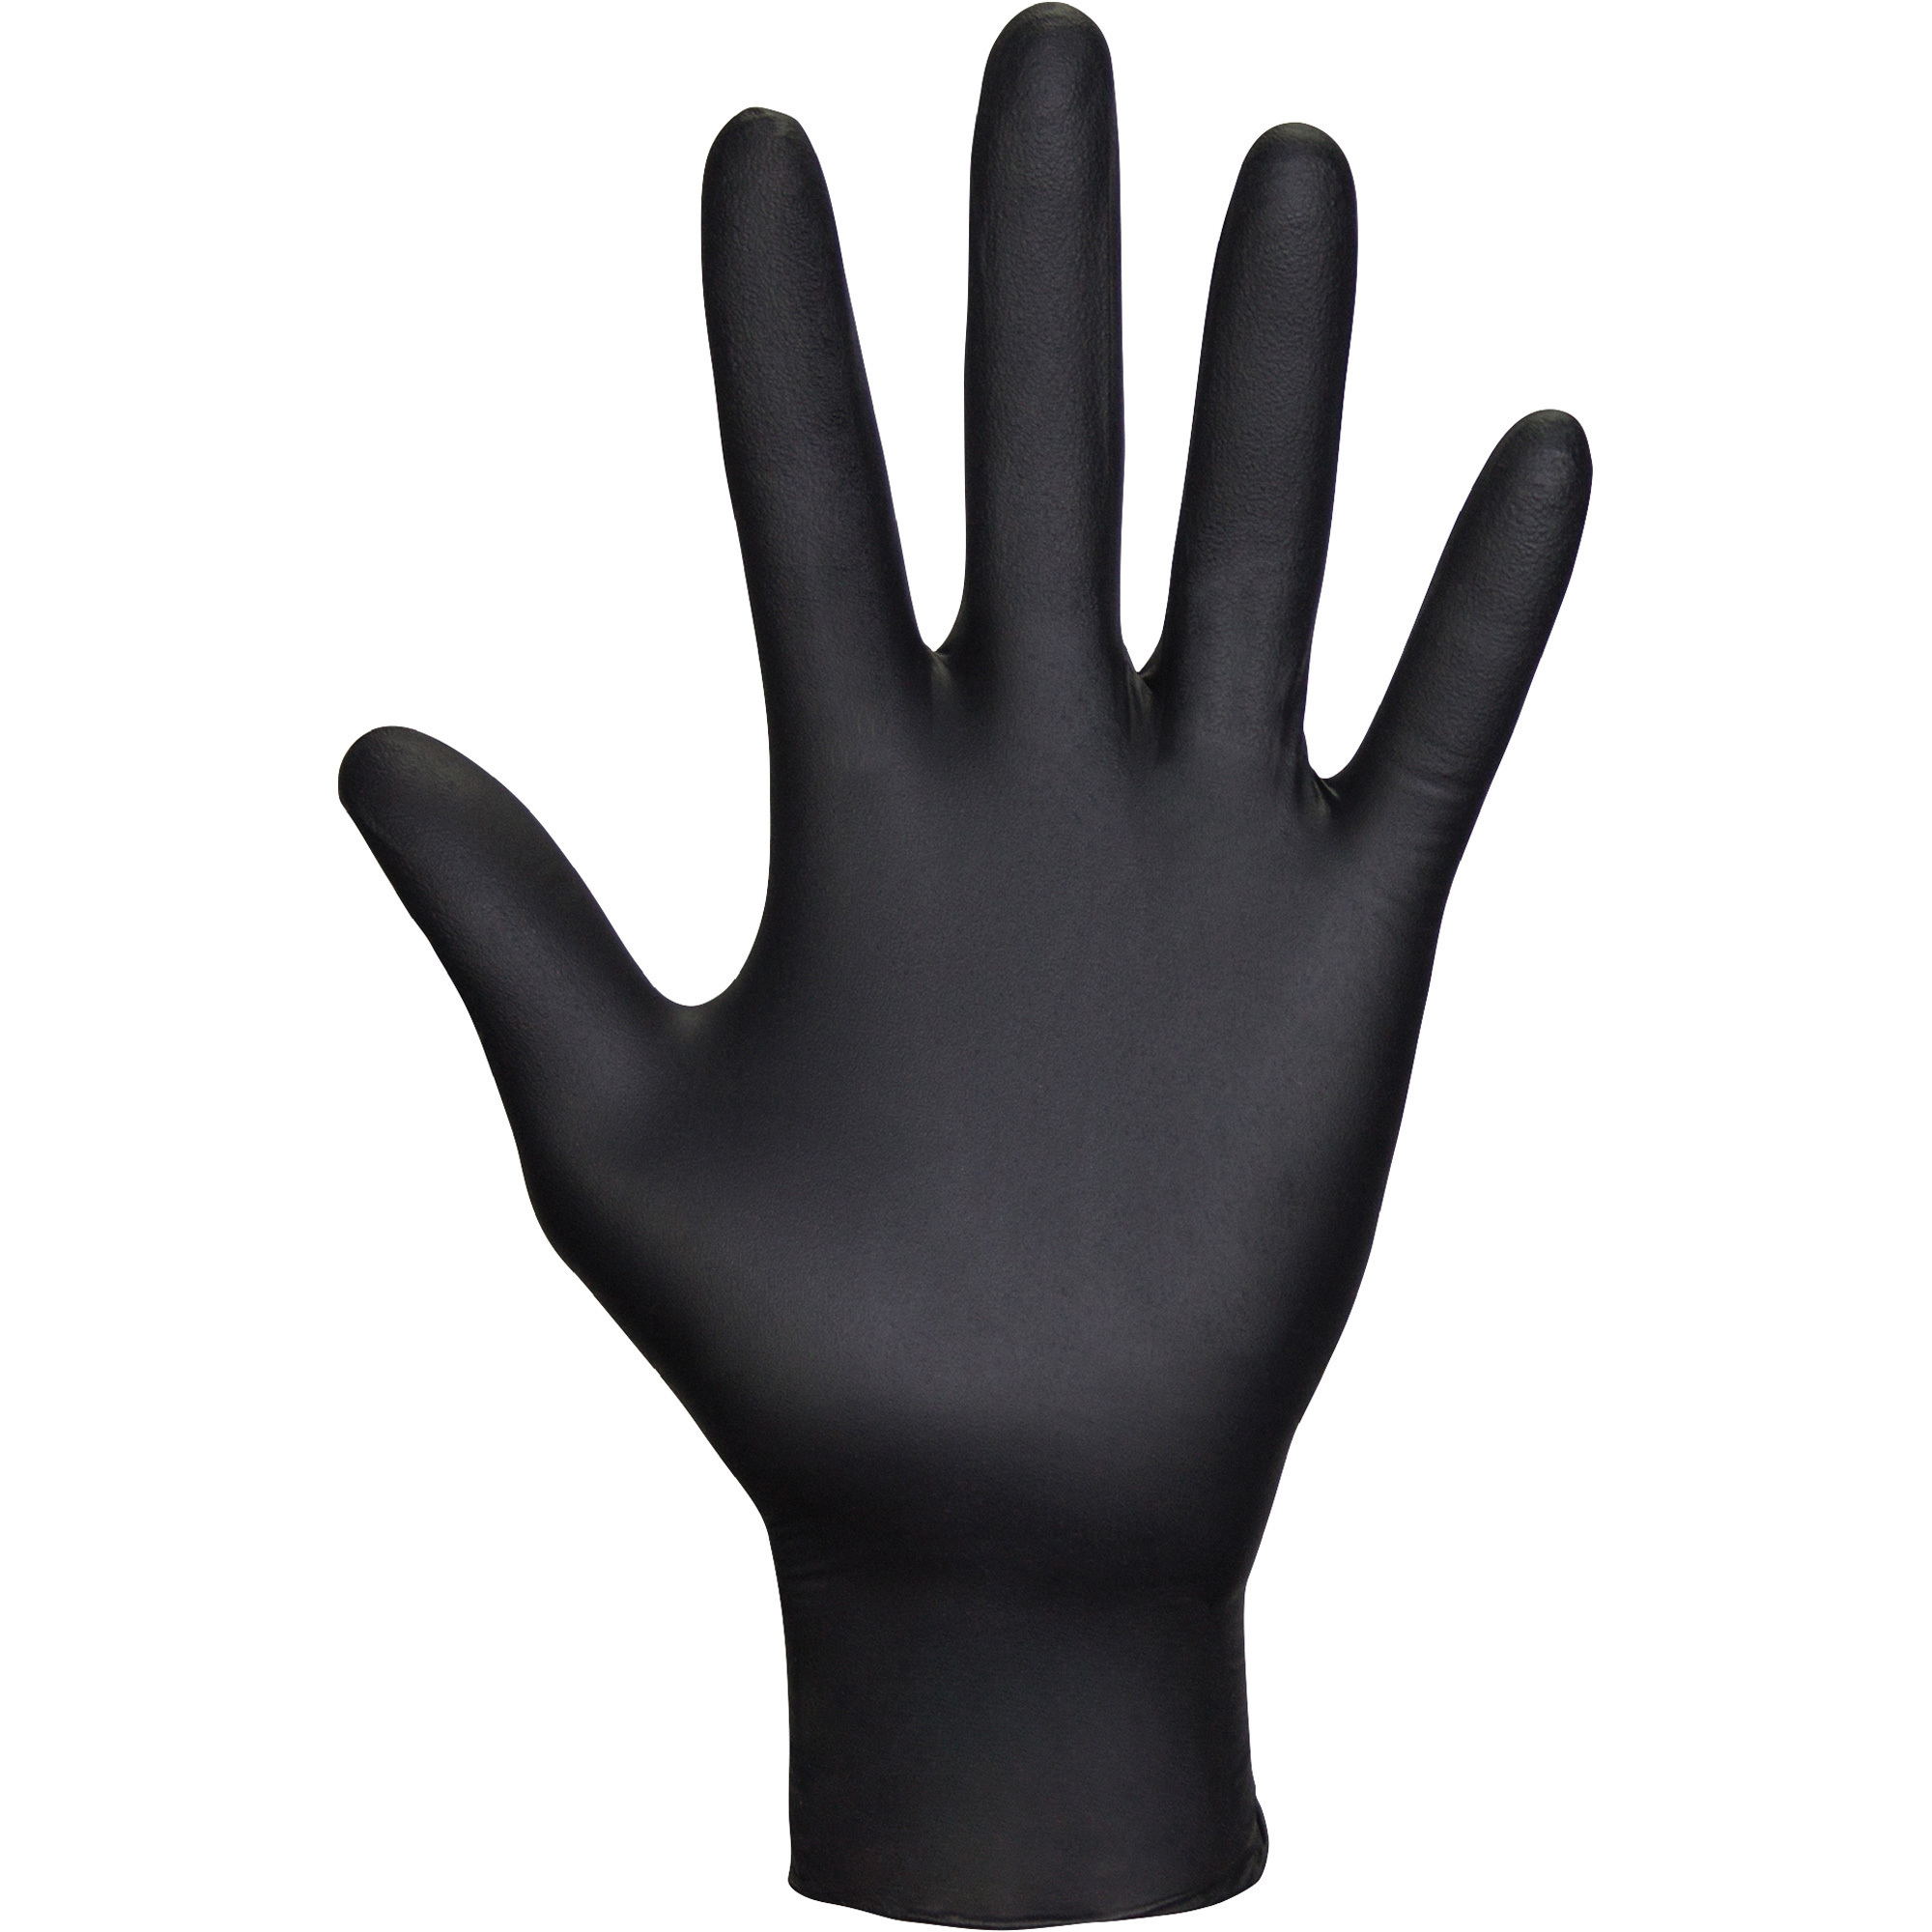 SAS Safety 7 Mil Raven Powder-Free, Non-Latex Disposable Safety Gloves, 100-Count Box, Black, Small, Model 66516